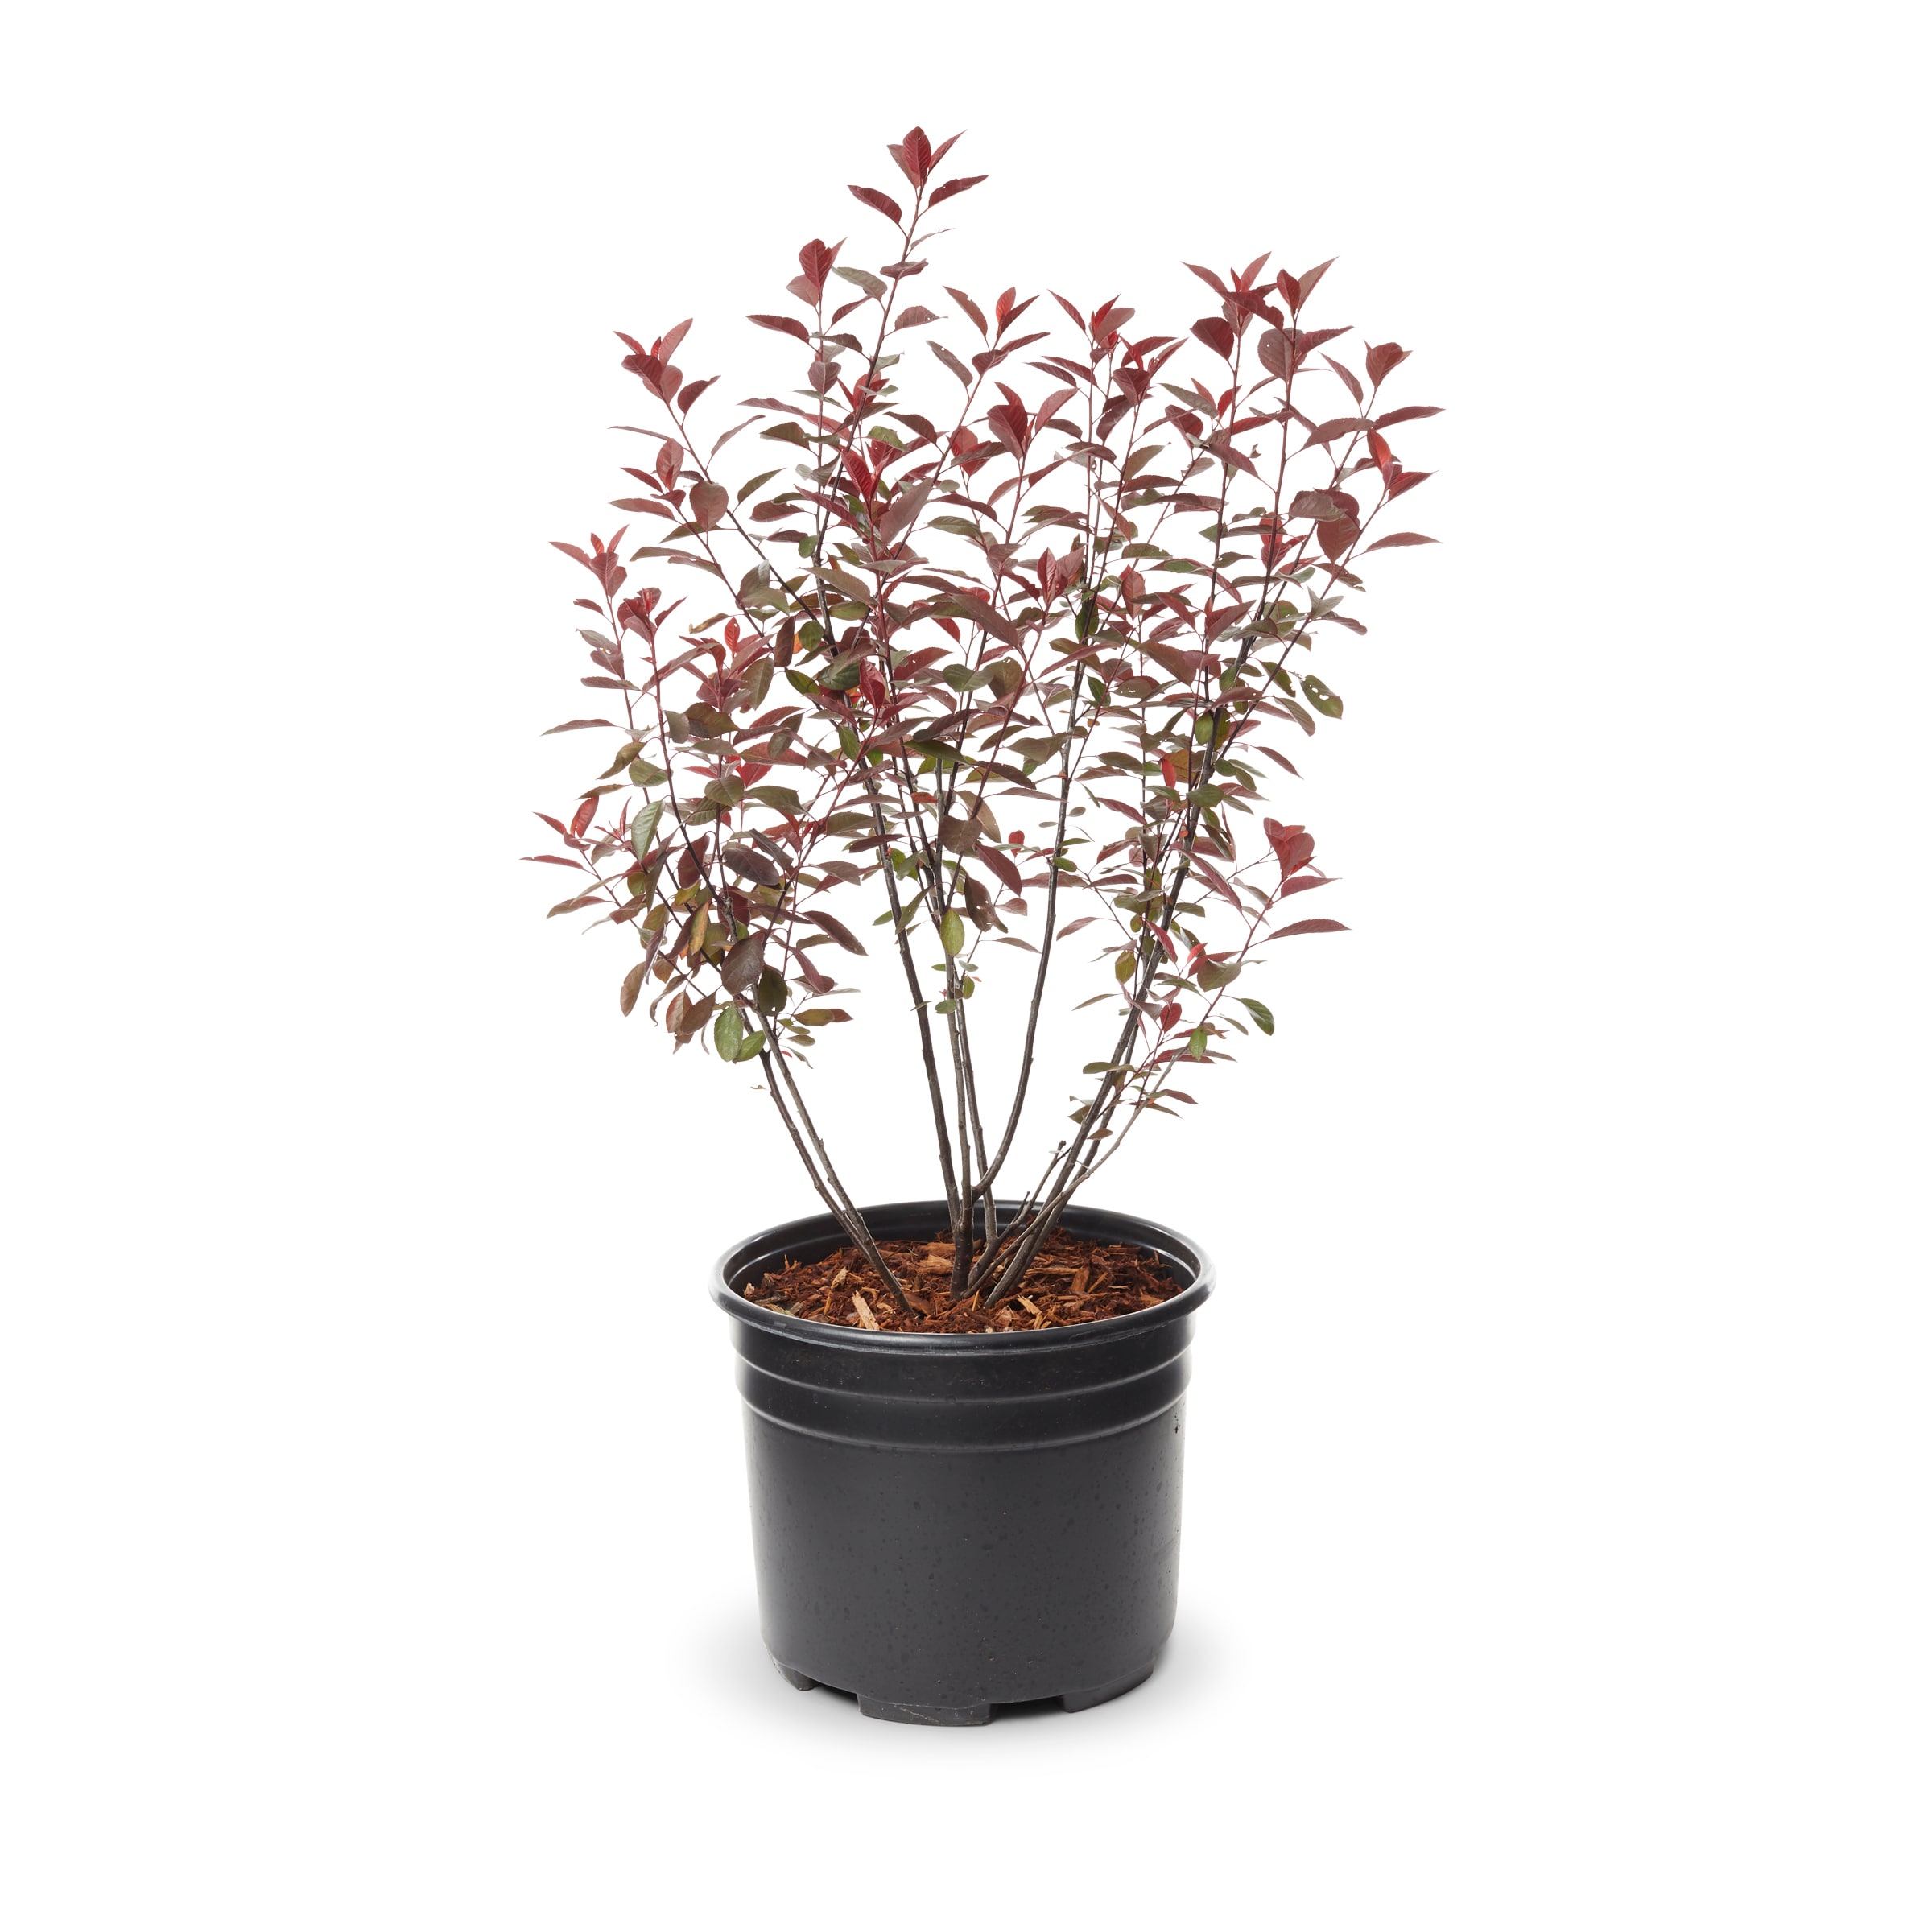 Image of Sand cherry shrub in a pot